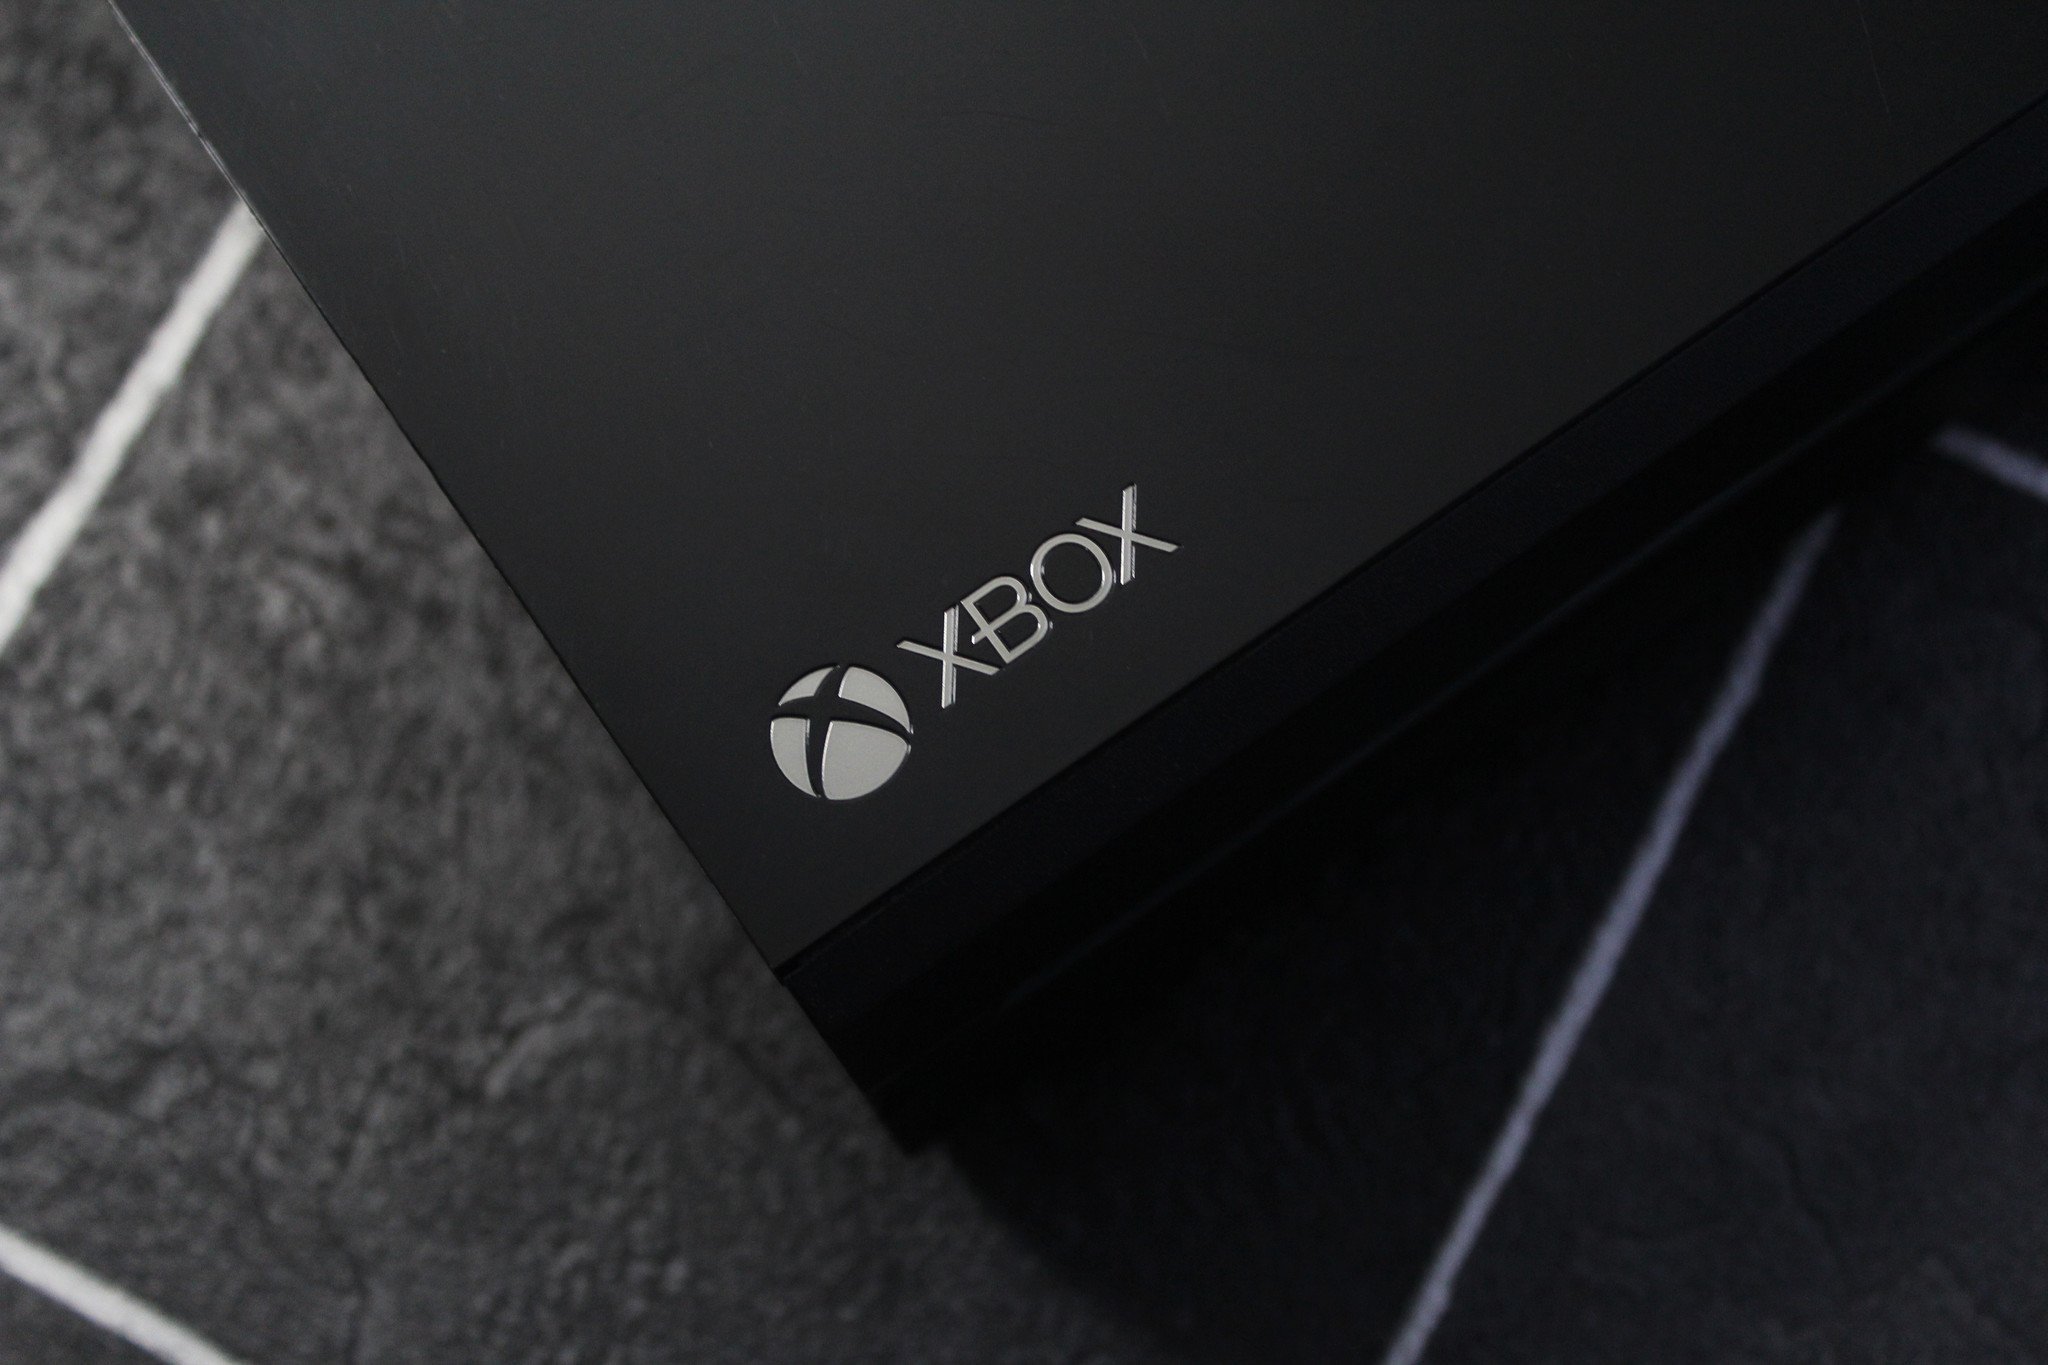 where to sell your xbox one